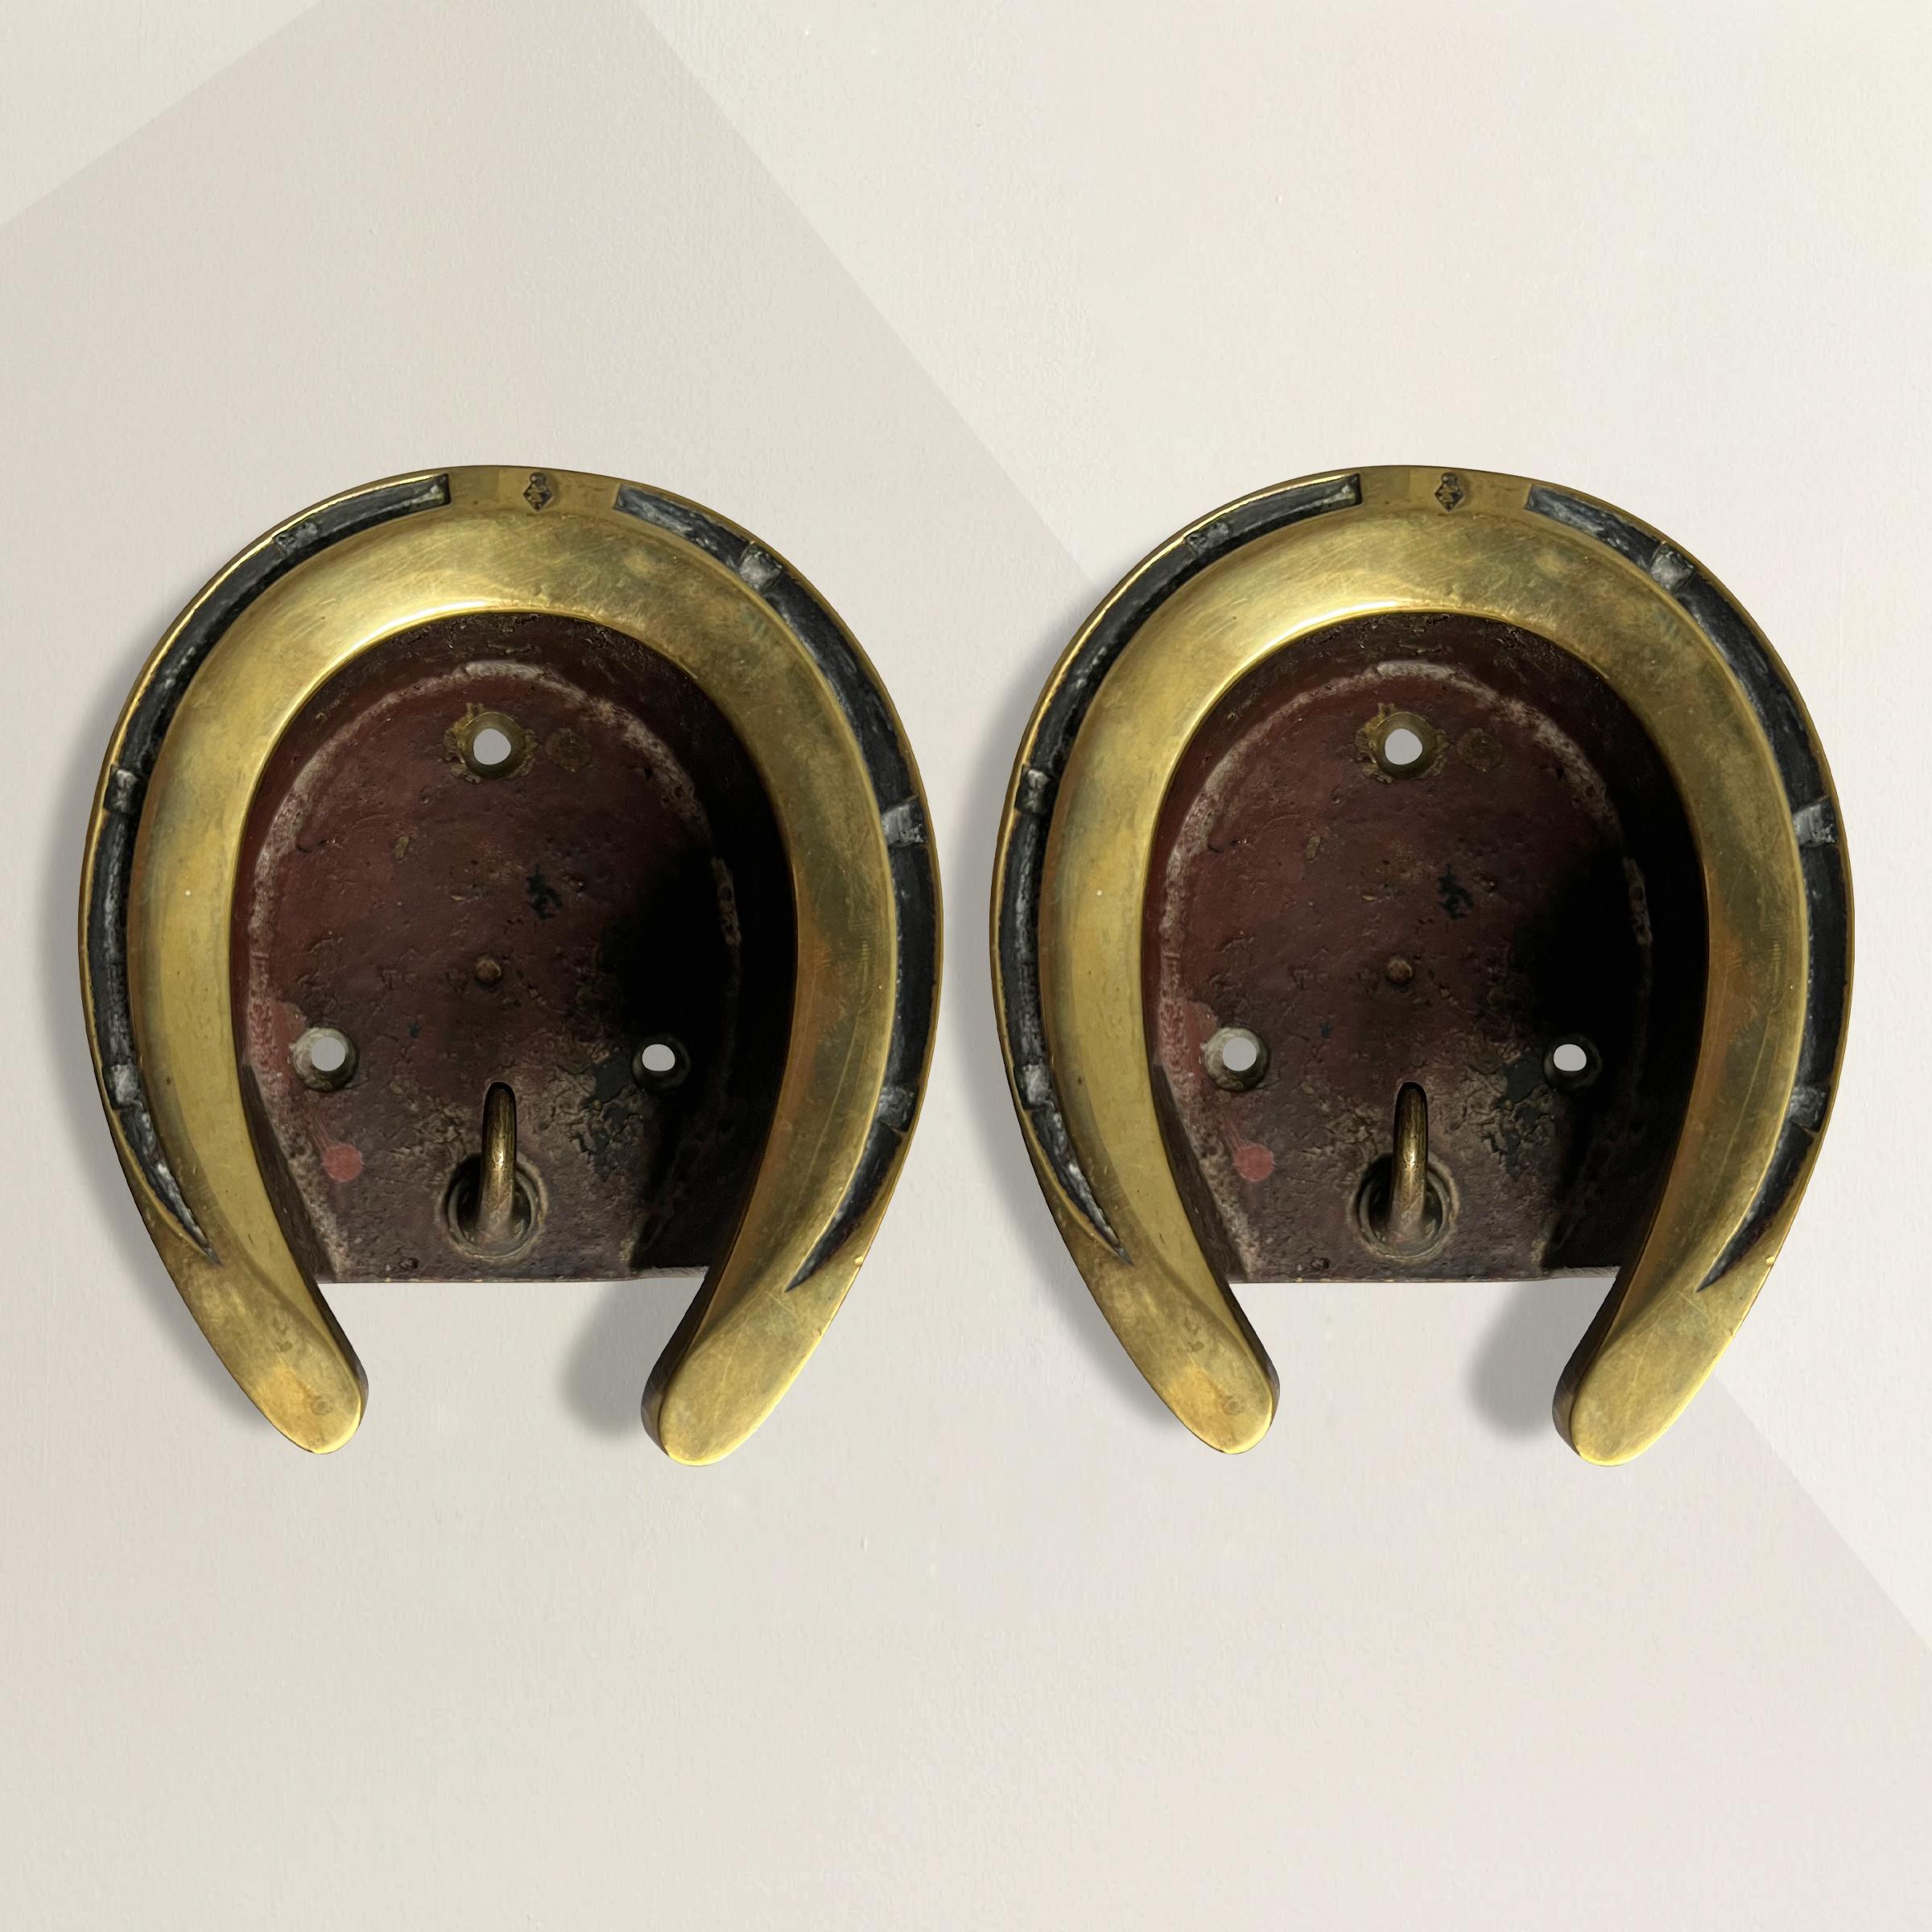 These late 19th century English brass bridle hooks are a charming nod to equestrian heritage and a testament to enduring craftsmanship. Each hook features a brass horseshoe proudly mounted on the face, symbolizing luck and the timeless bond between